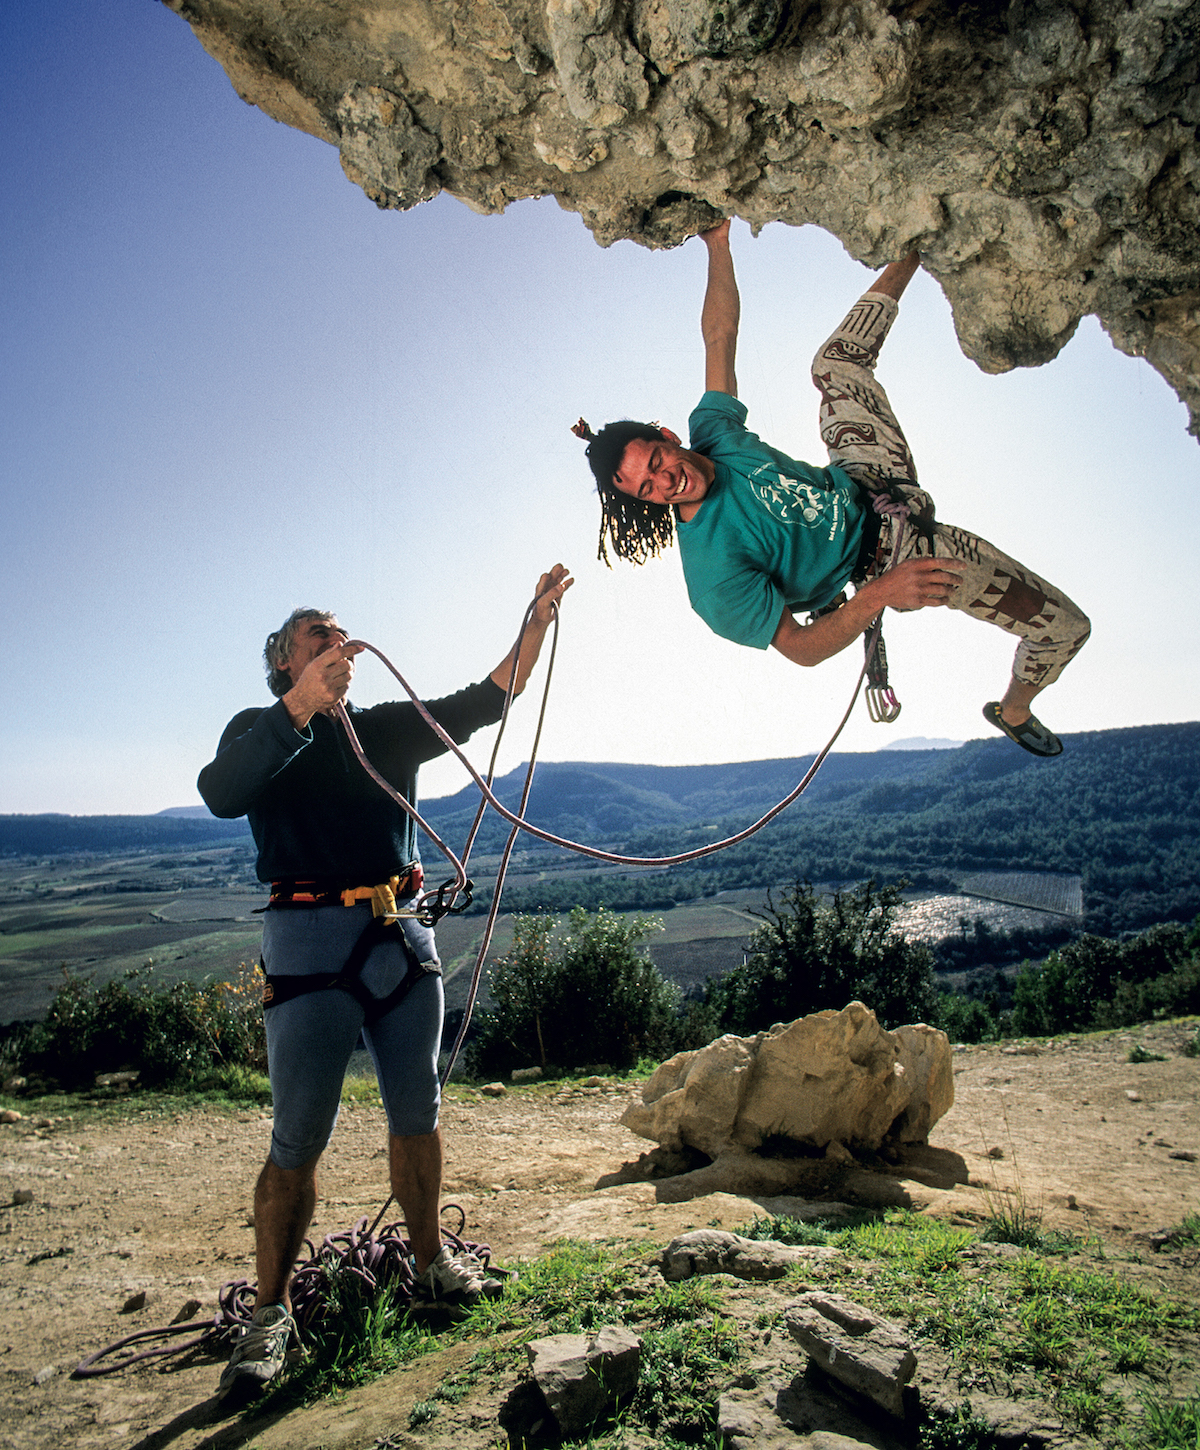 Hugues Beauzile and Lucien Lulu Berardini climbing at the crag they helped develop in Claret, France. [Photo] Pascal Tournaire